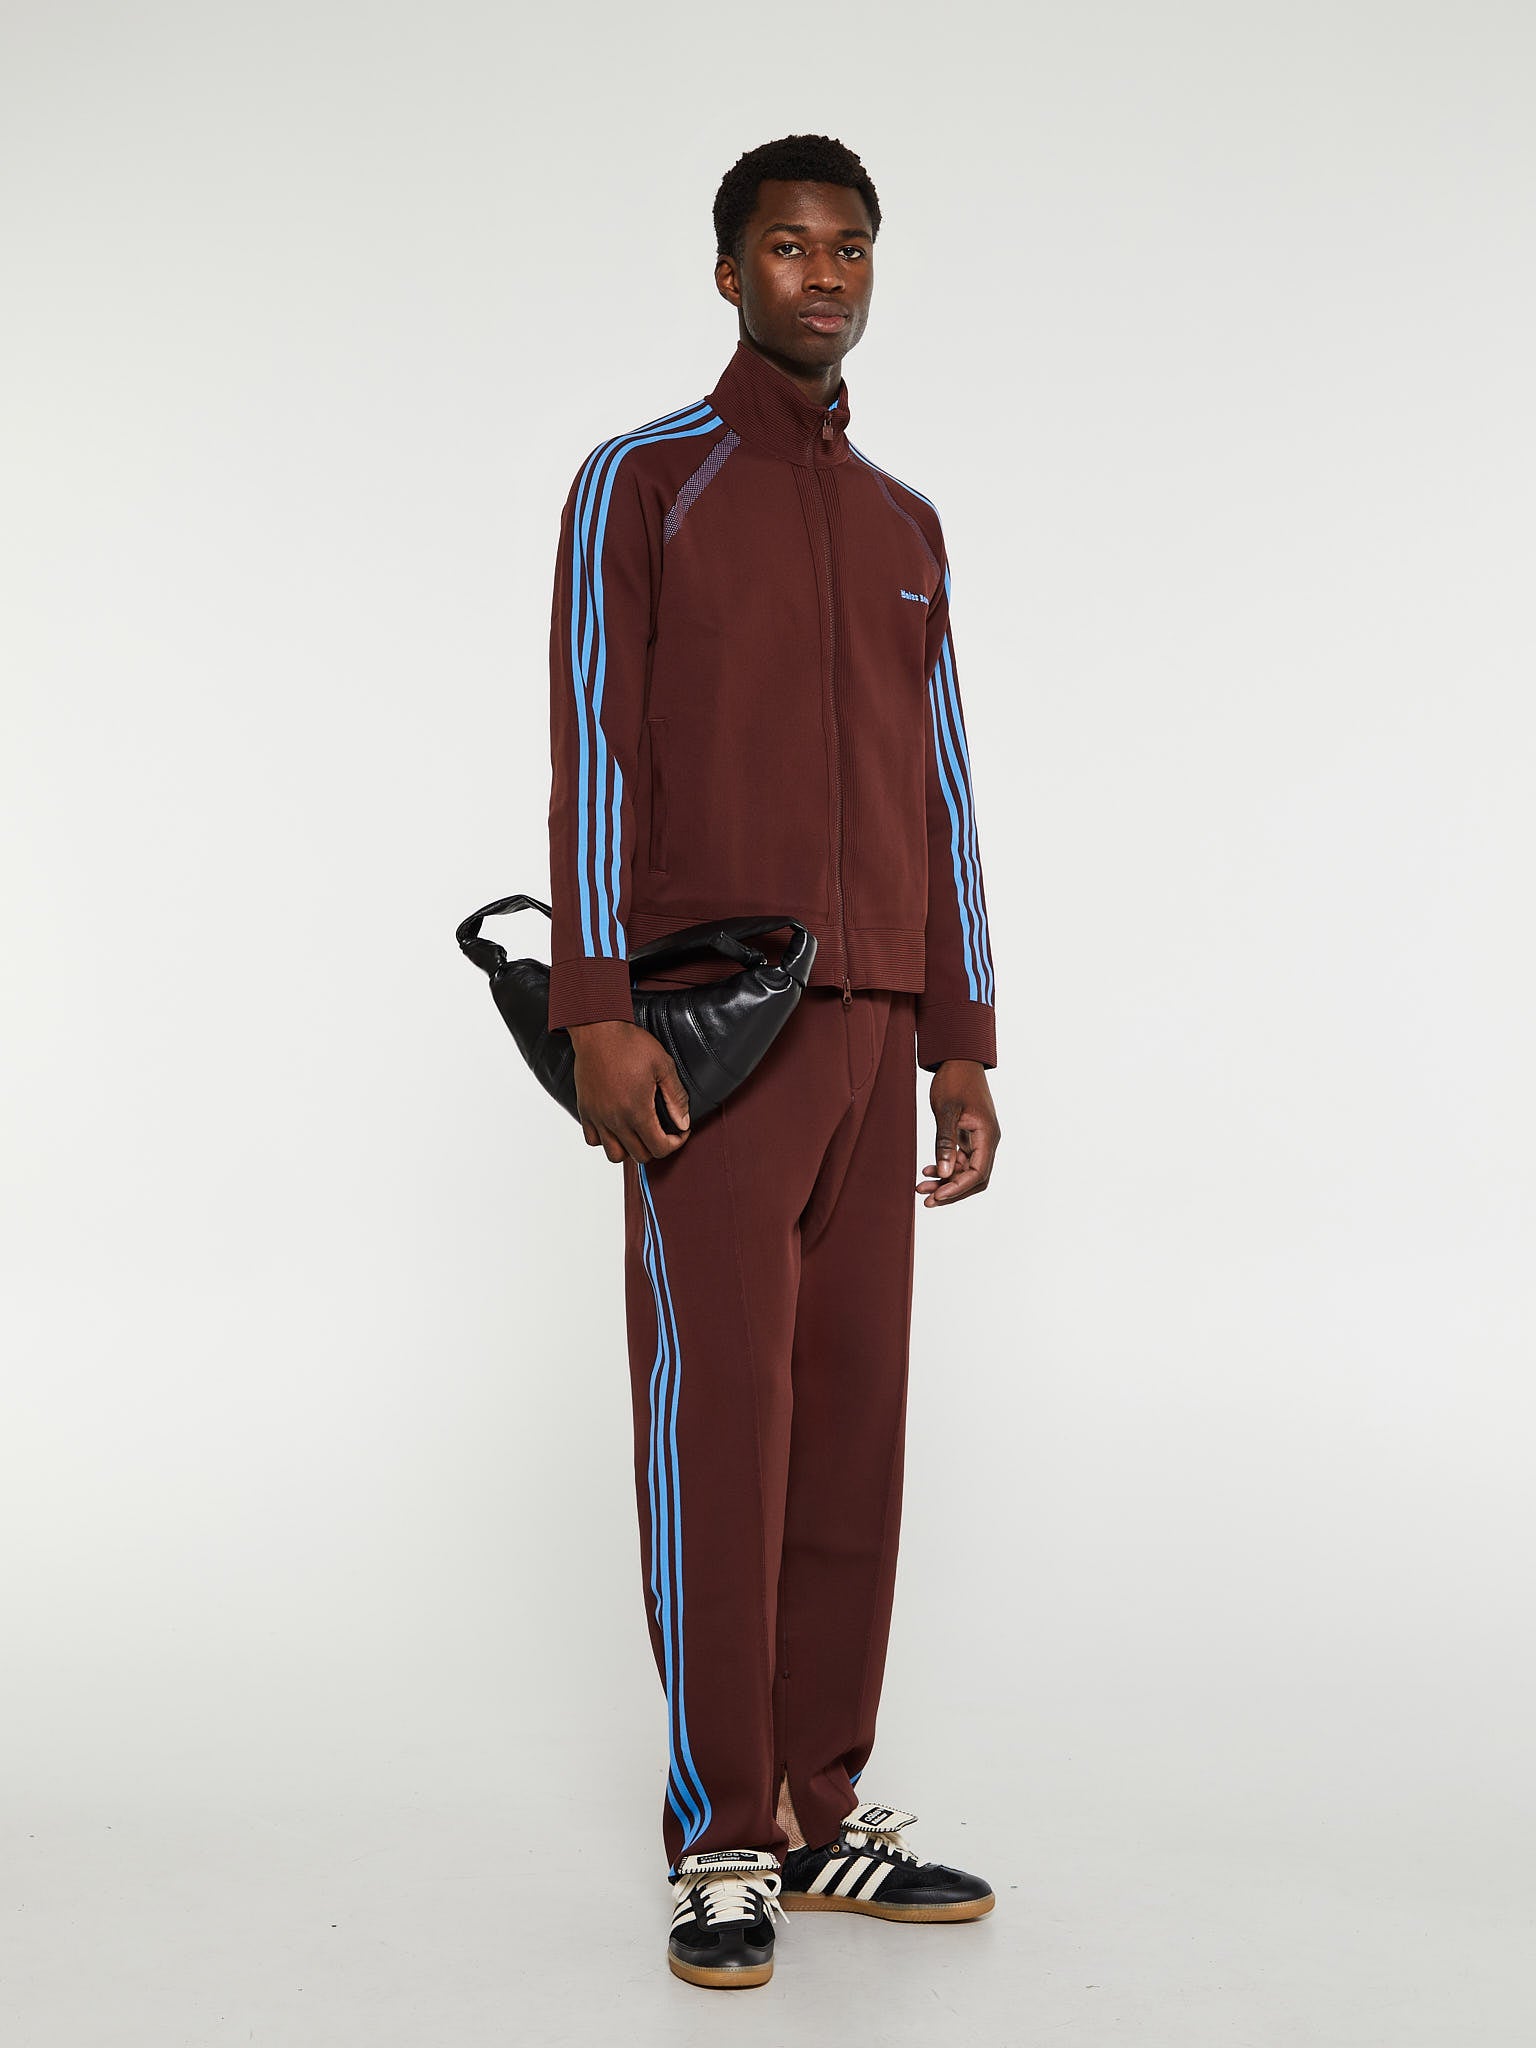 Wales Bonner Knit Tracksuit Pants in Mystery Brown